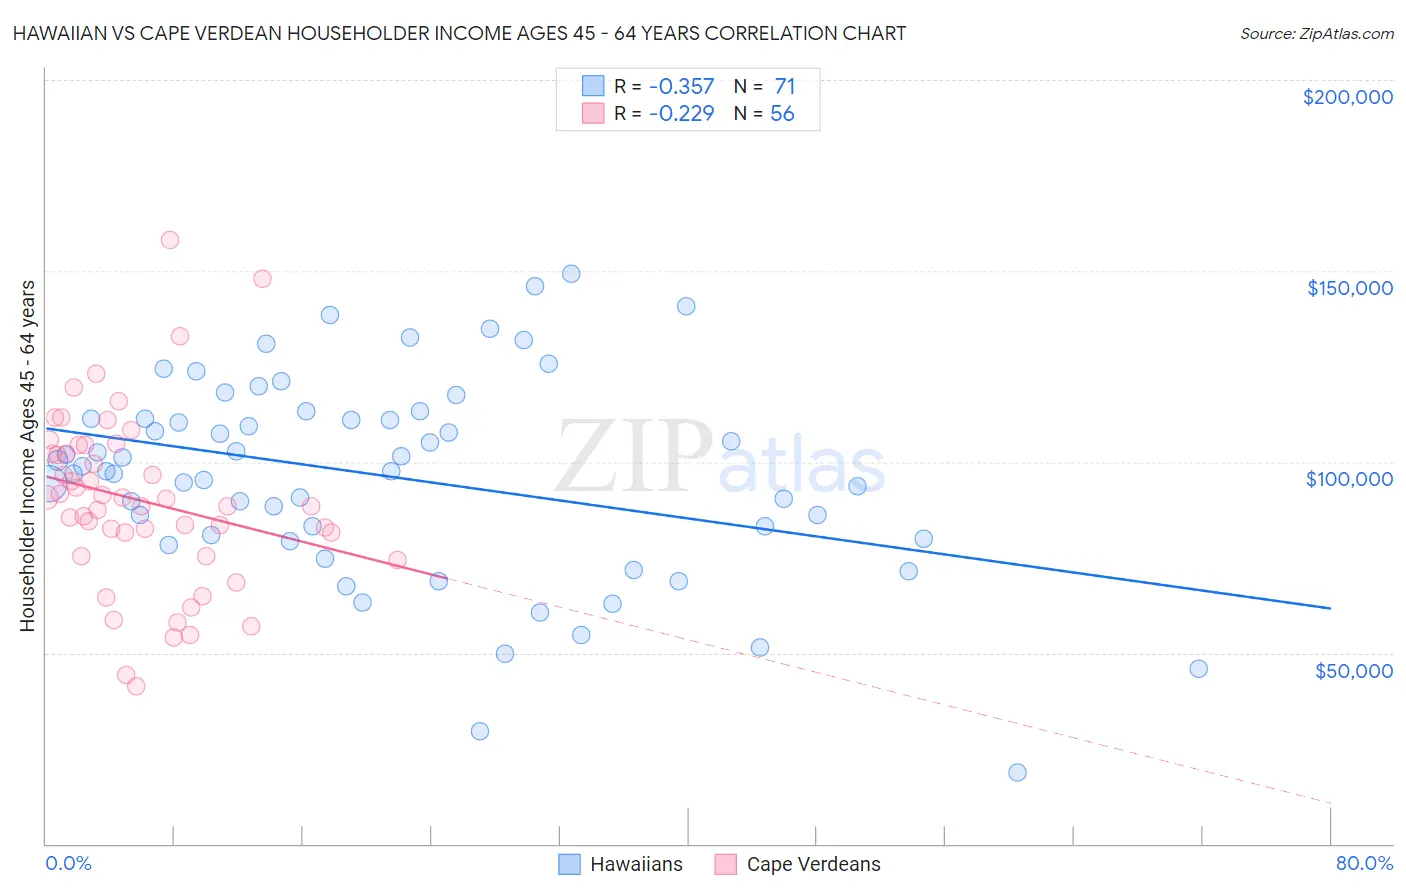 Hawaiian vs Cape Verdean Householder Income Ages 45 - 64 years